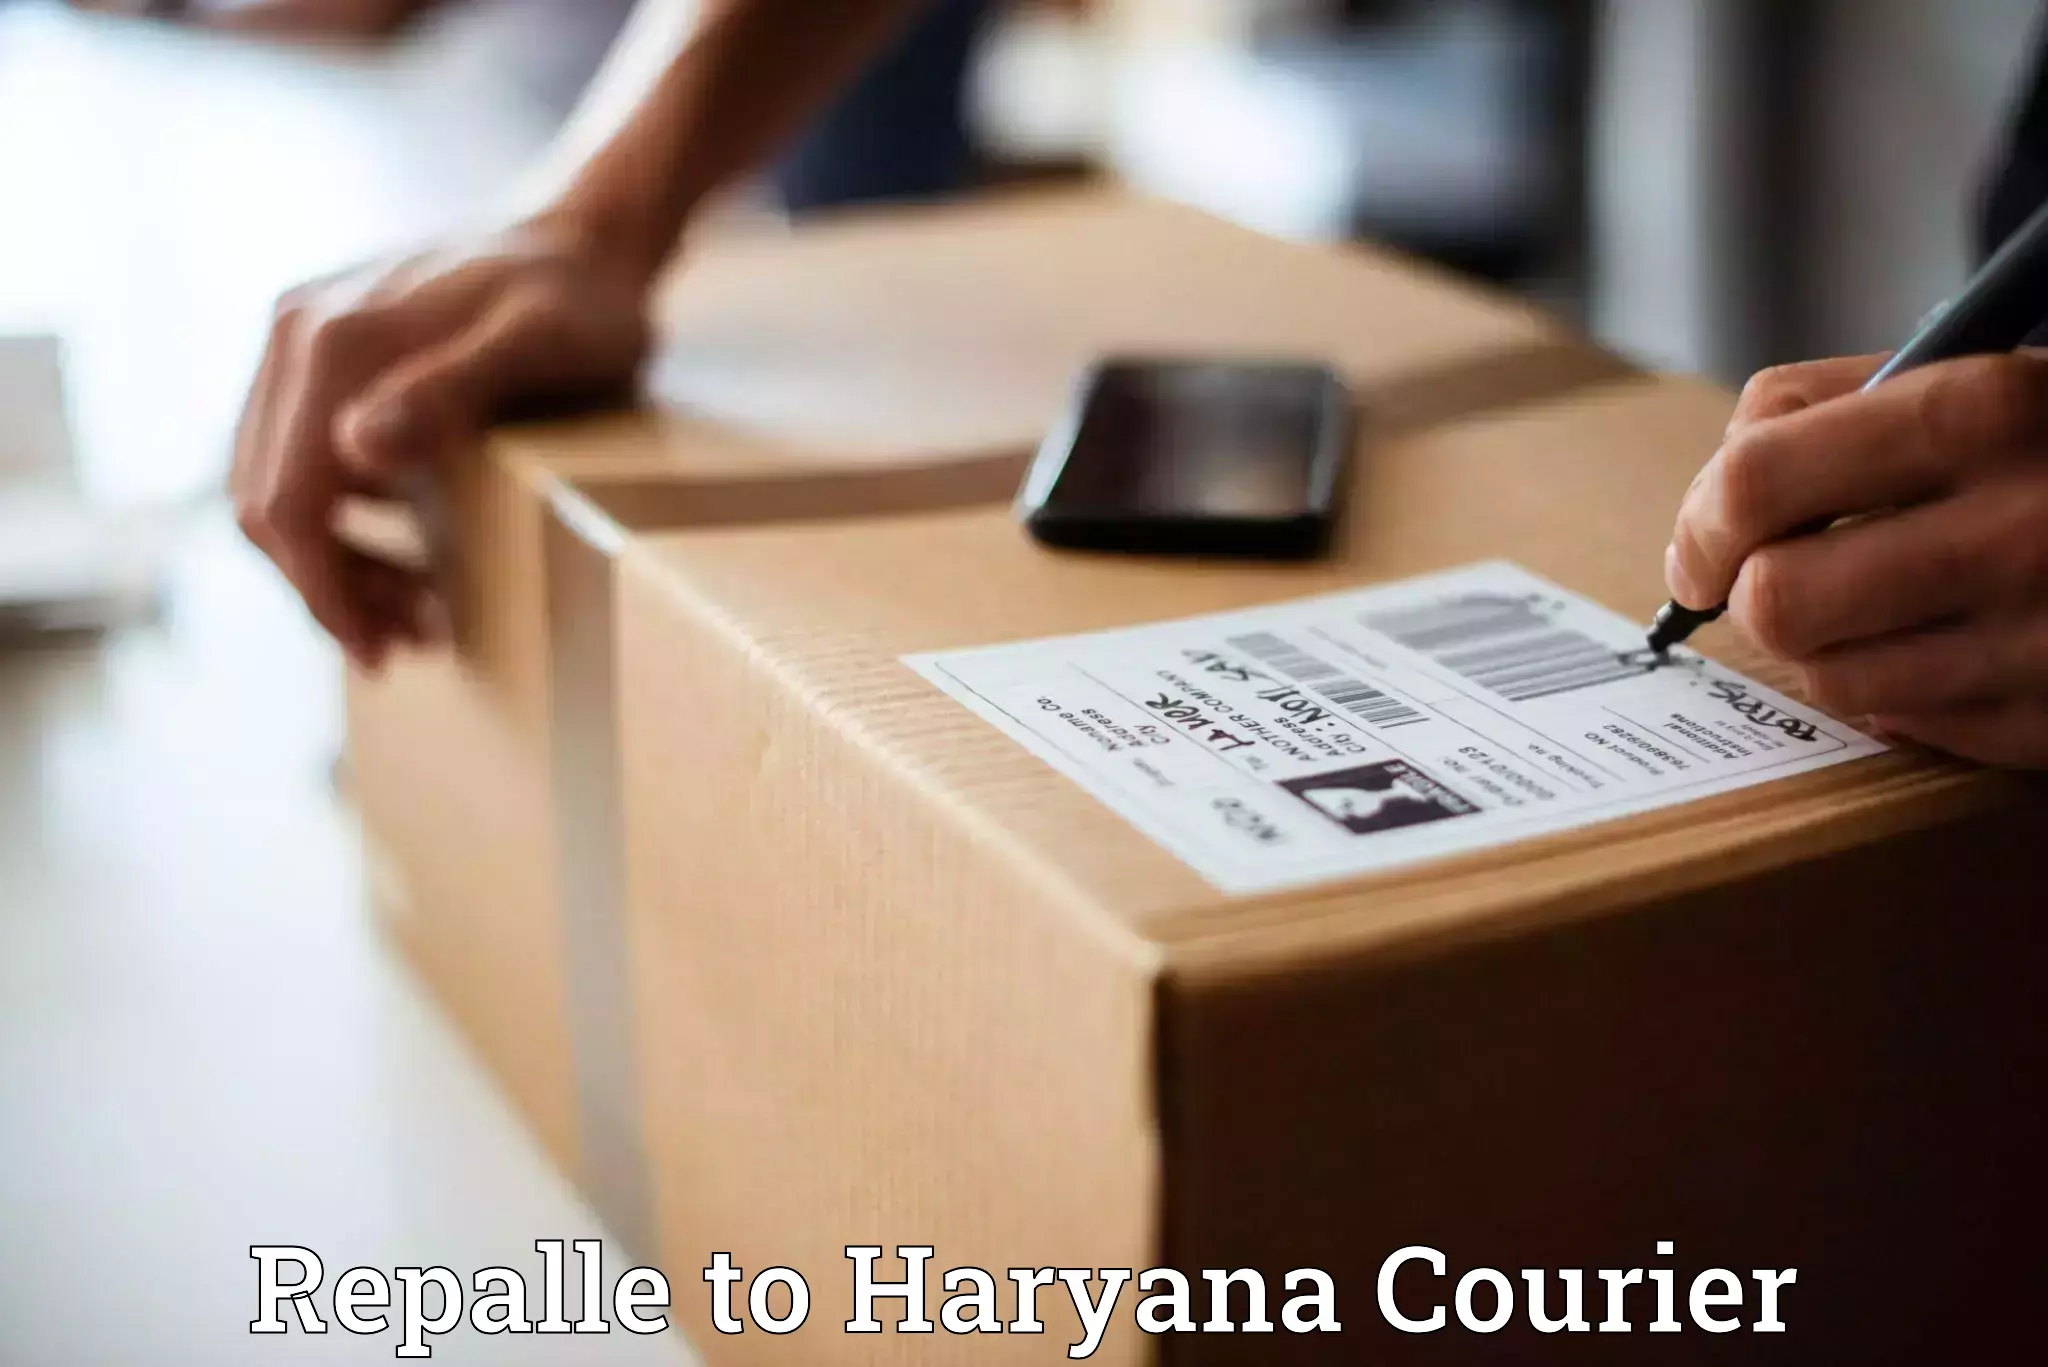 Large package courier in Repalle to Gurgaon